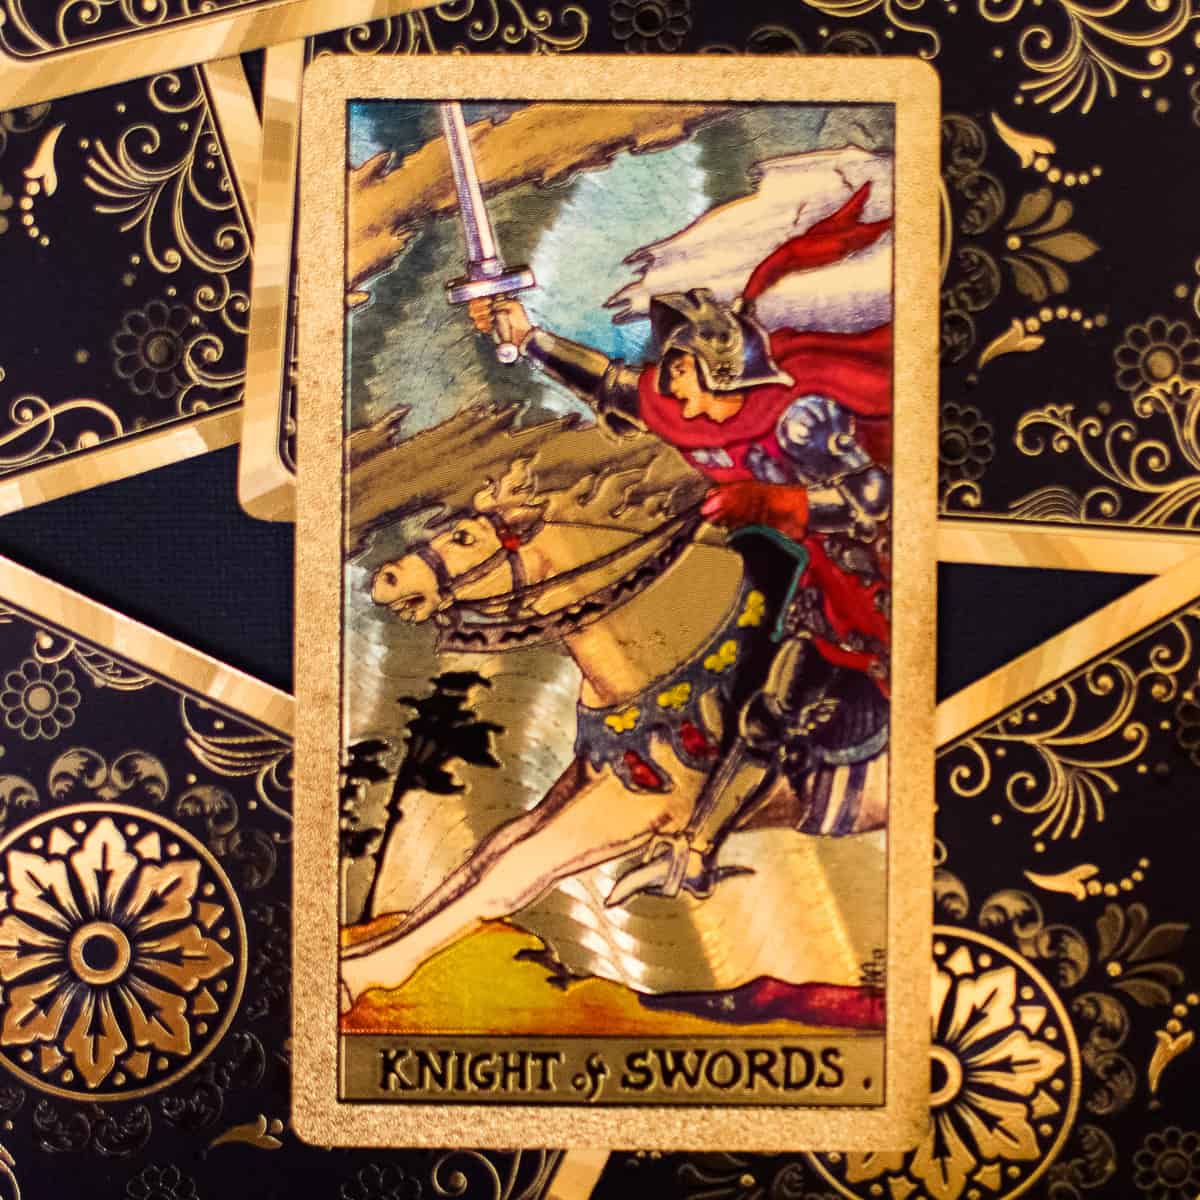 A knight charging on horse with sword drawn depicted on a tarot card. 